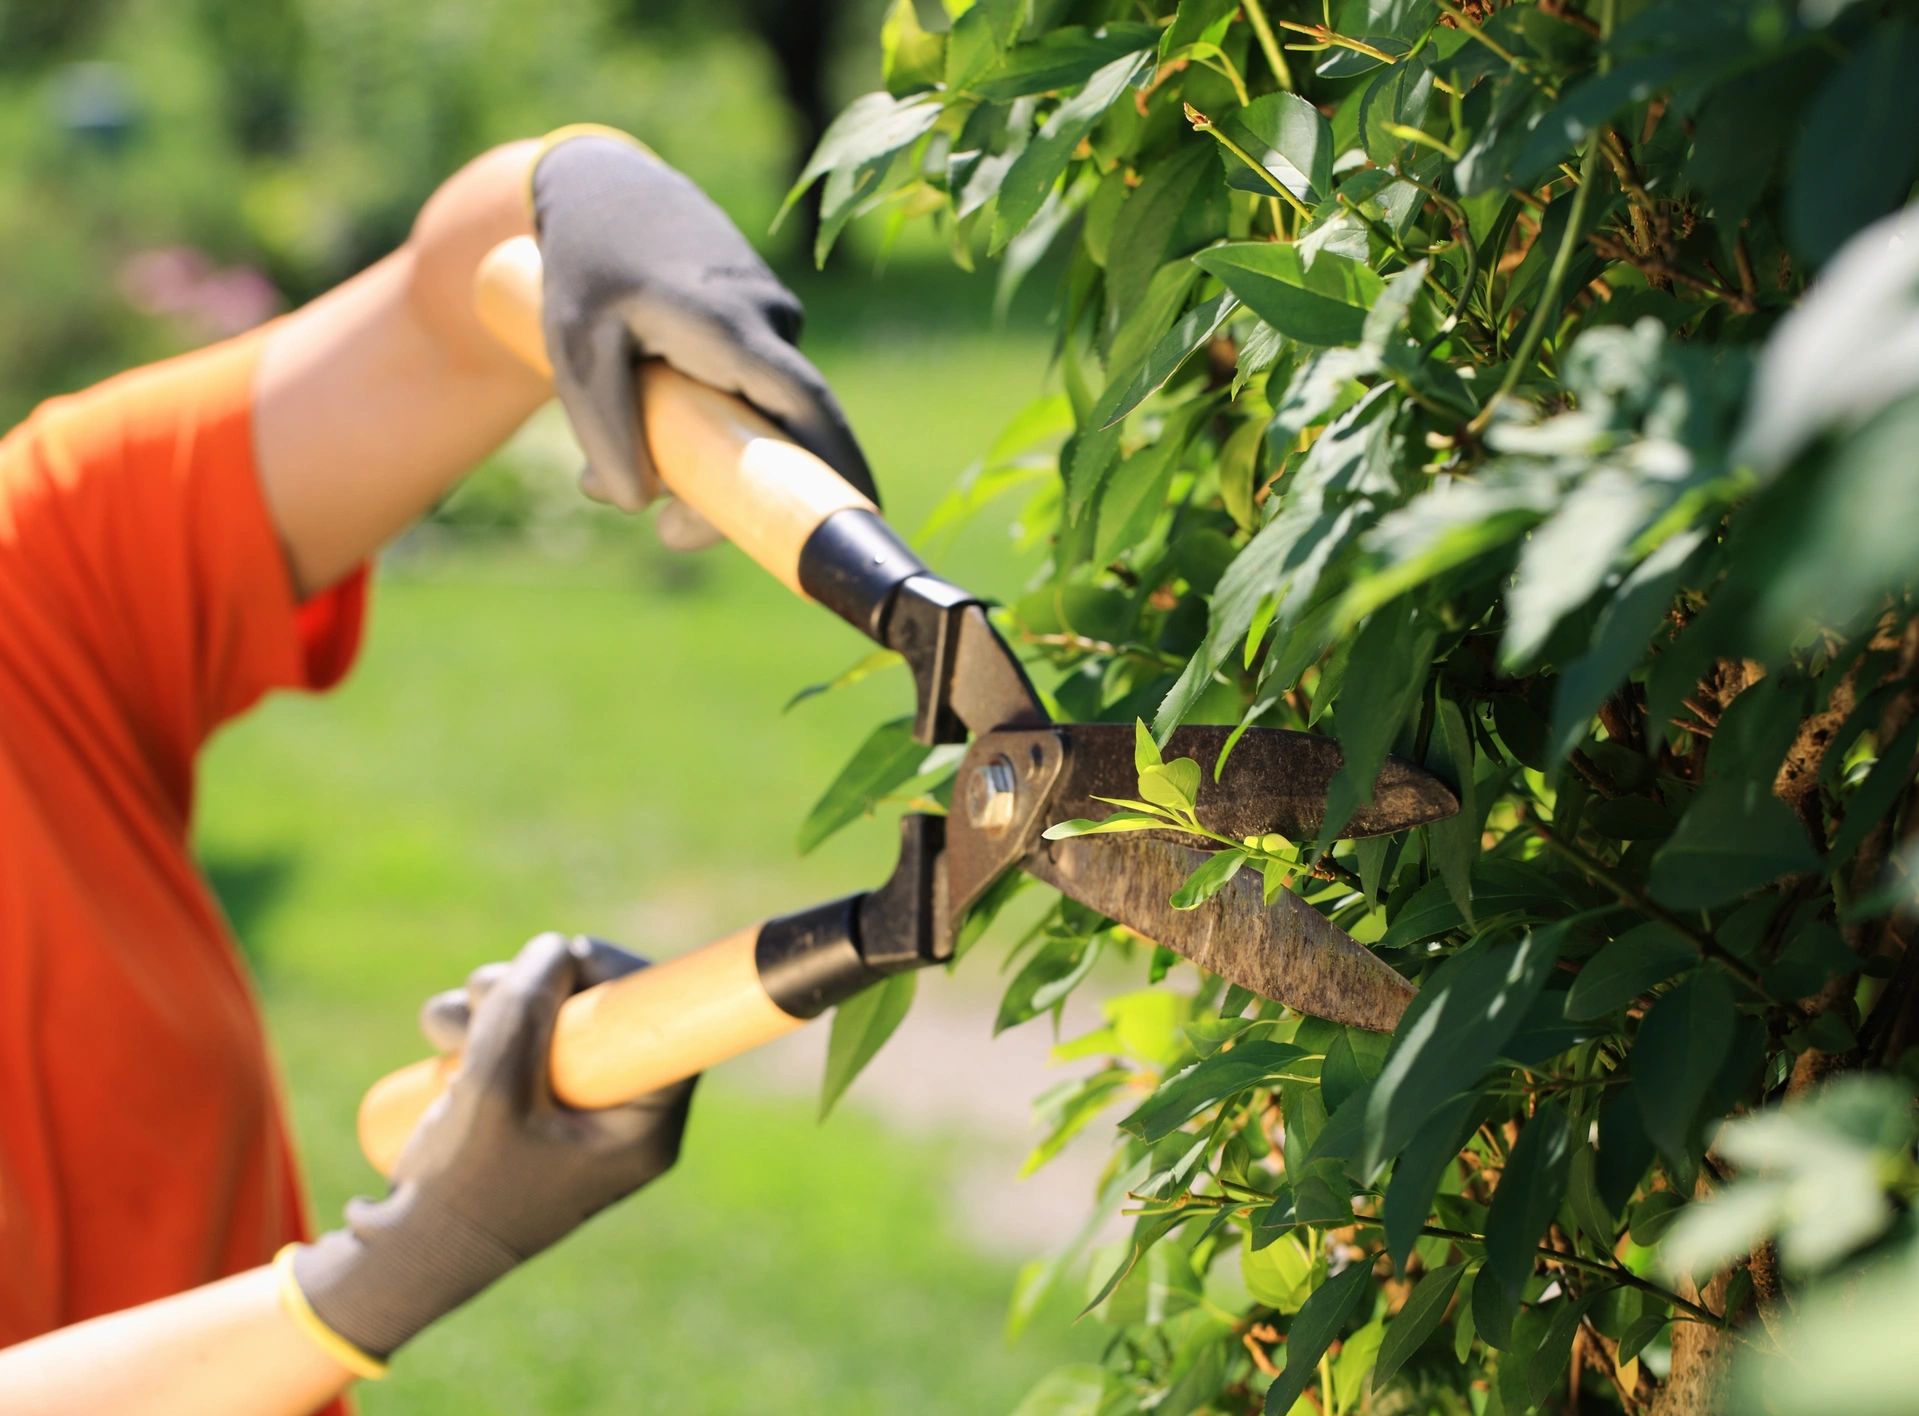 Pruning with hand shears